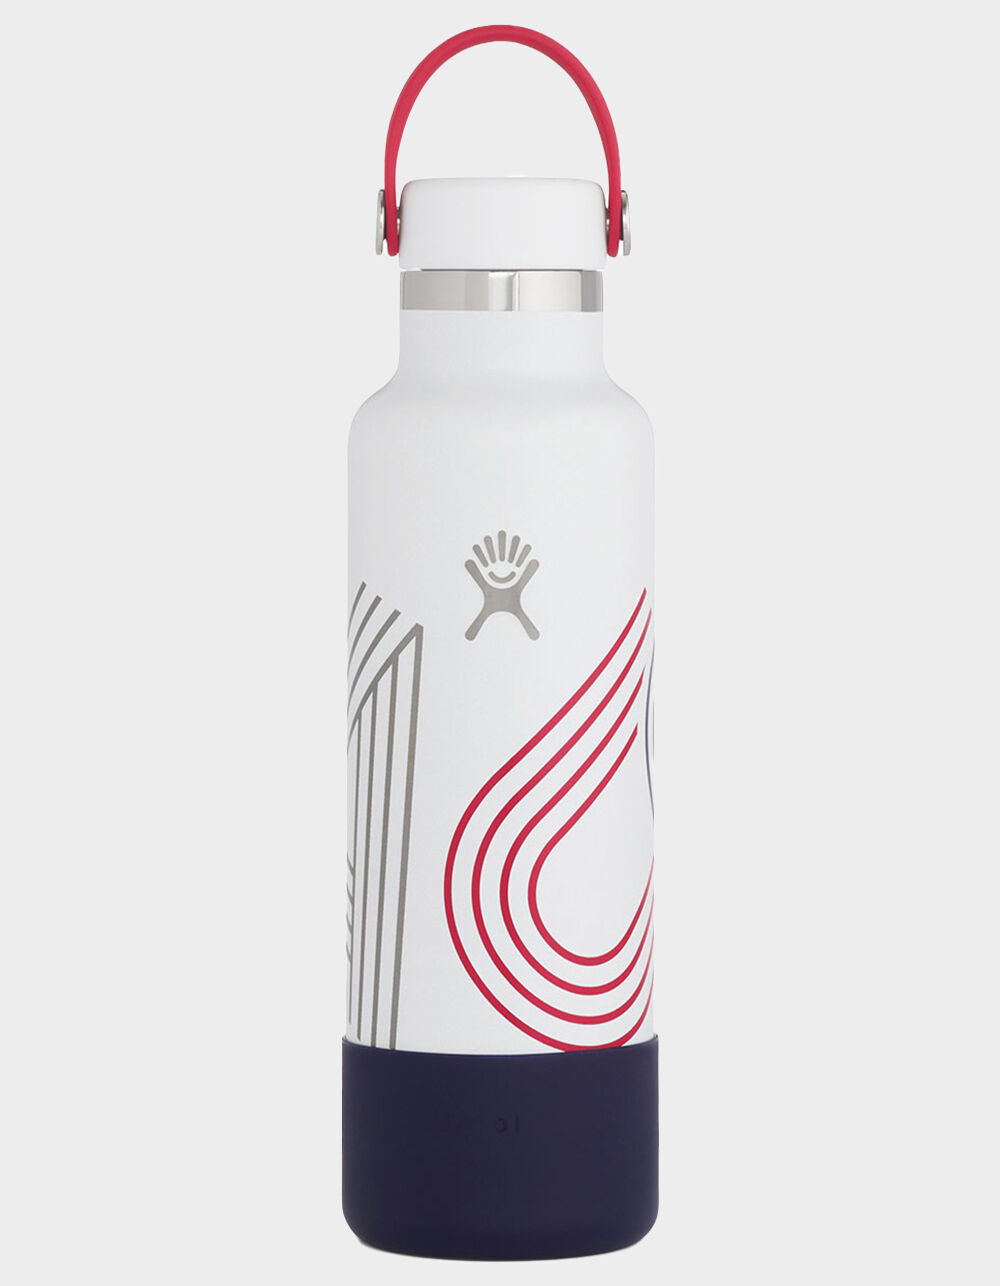 Hydro Flask on X: Yes #HydroFlask makes more than quality water